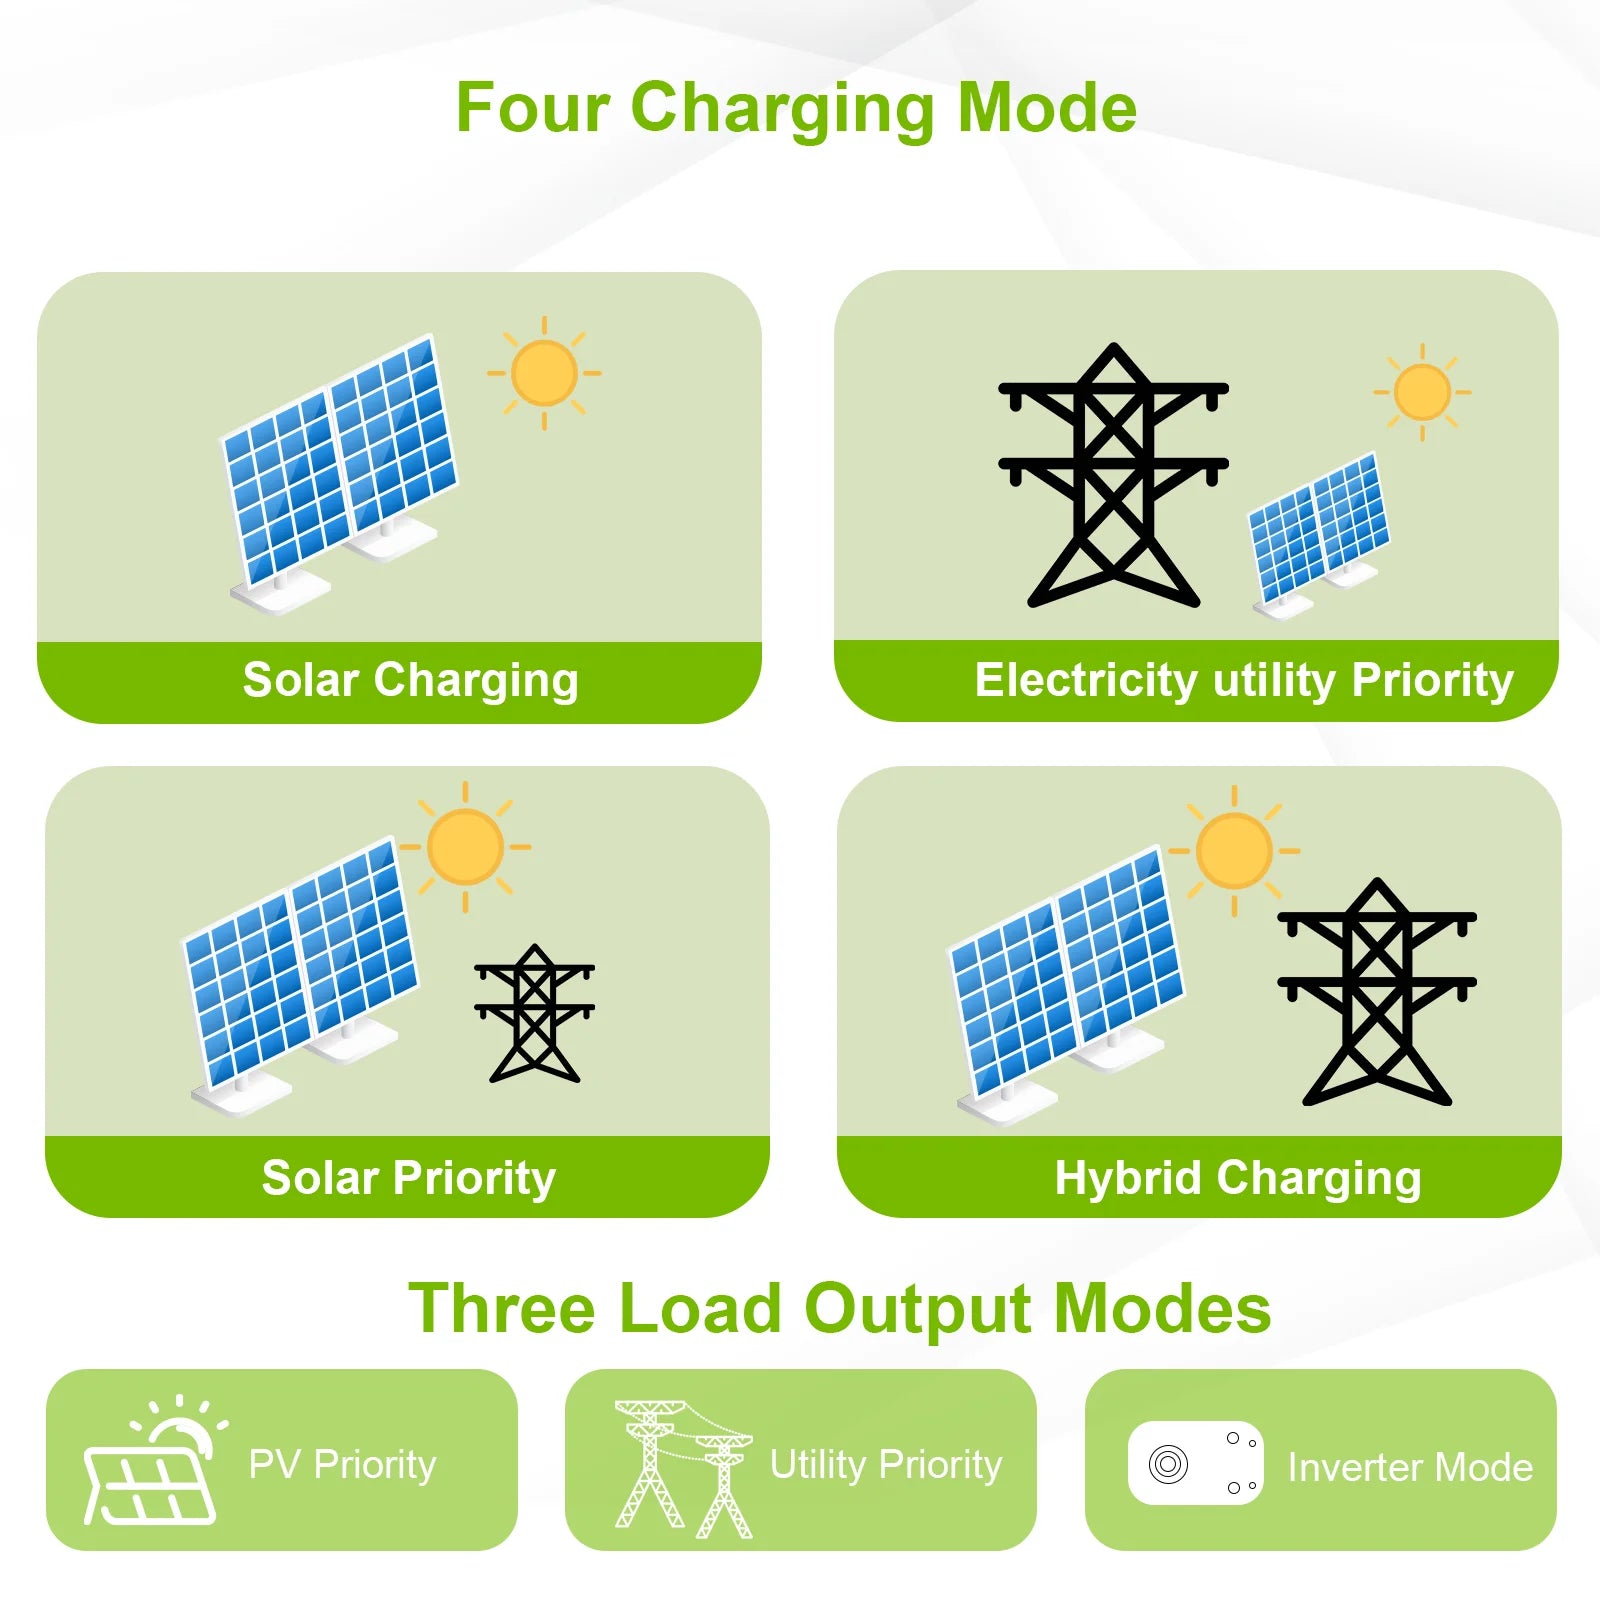 Smart charging system with four modes: solar, hybrid, load output, and inverter.